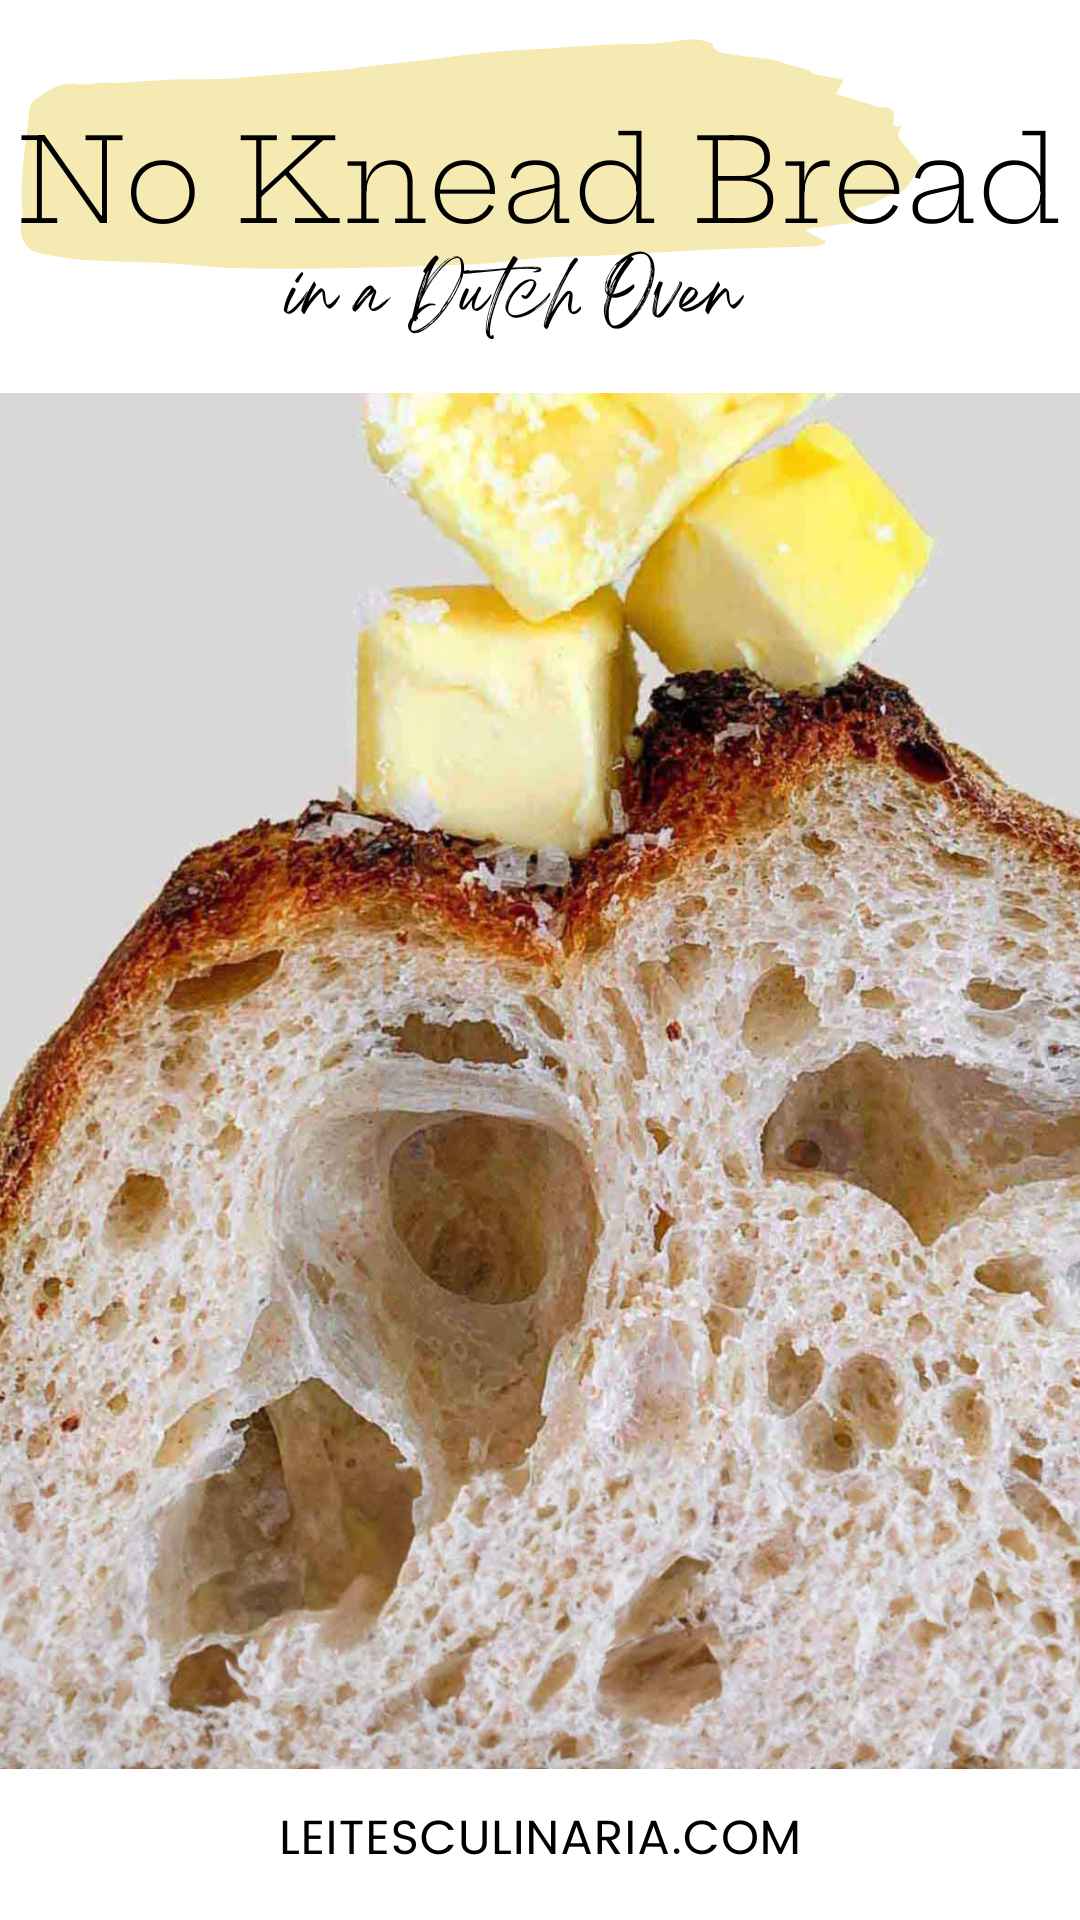 An interior view of a loaf of Jim Lahey's no-knead bread, topped with cubes of butter and flaked salt.